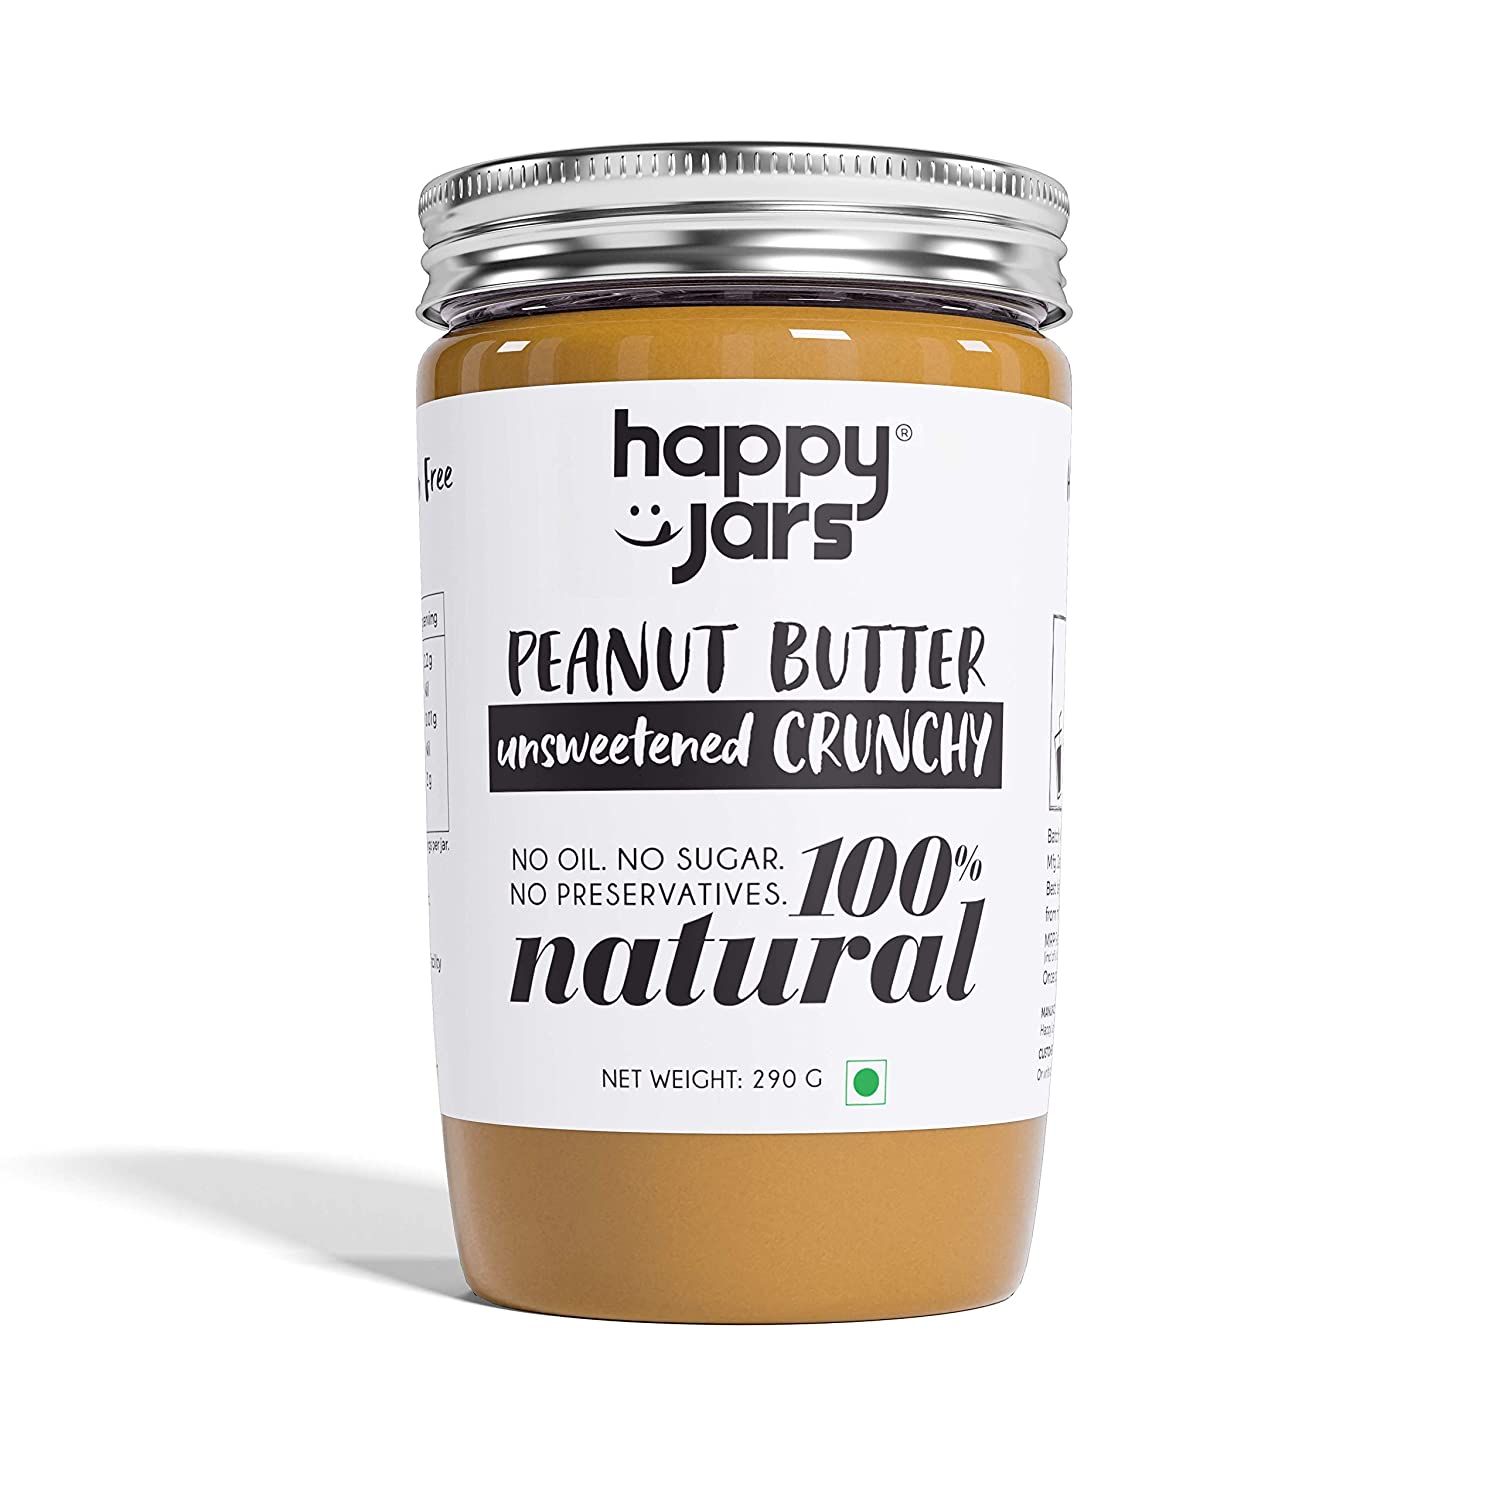 Happy Jars Unsweetened Peanut Butter Crunchy Image